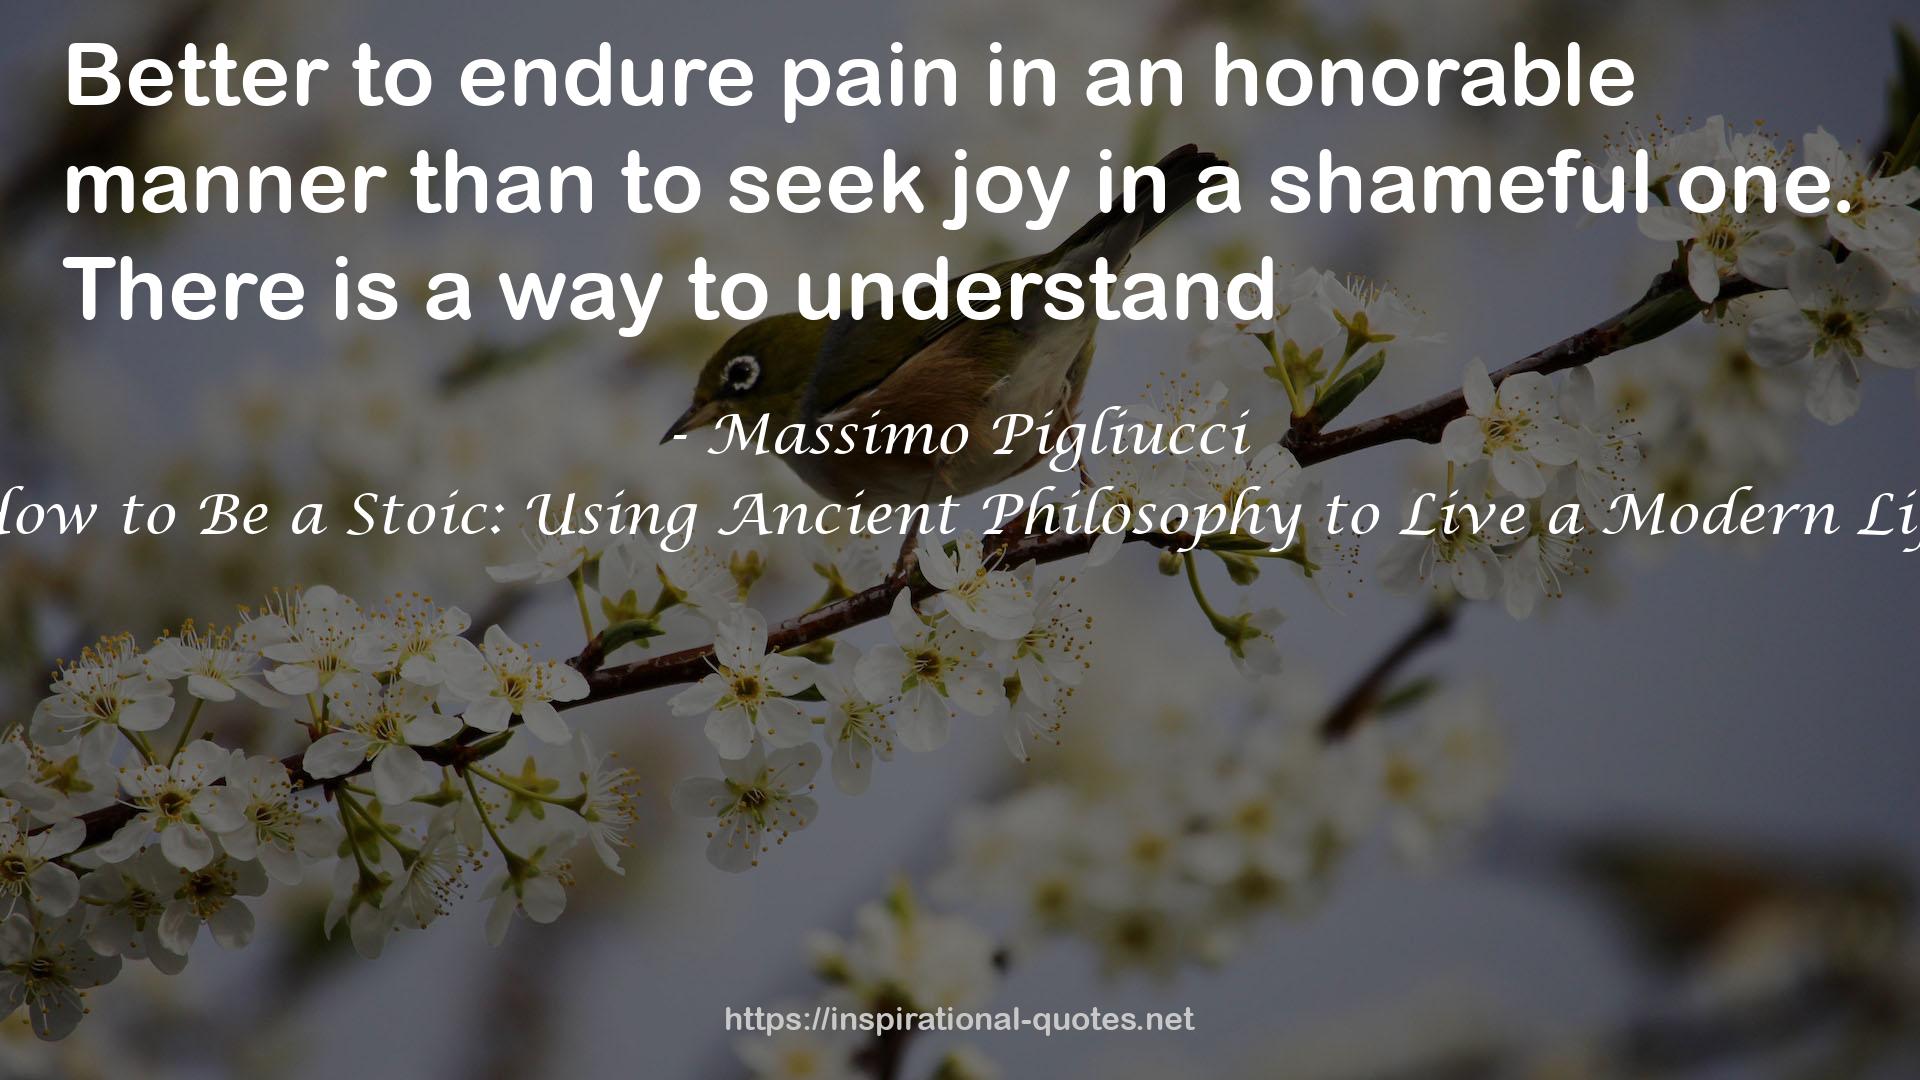 How to Be a Stoic: Using Ancient Philosophy to Live a Modern Life QUOTES